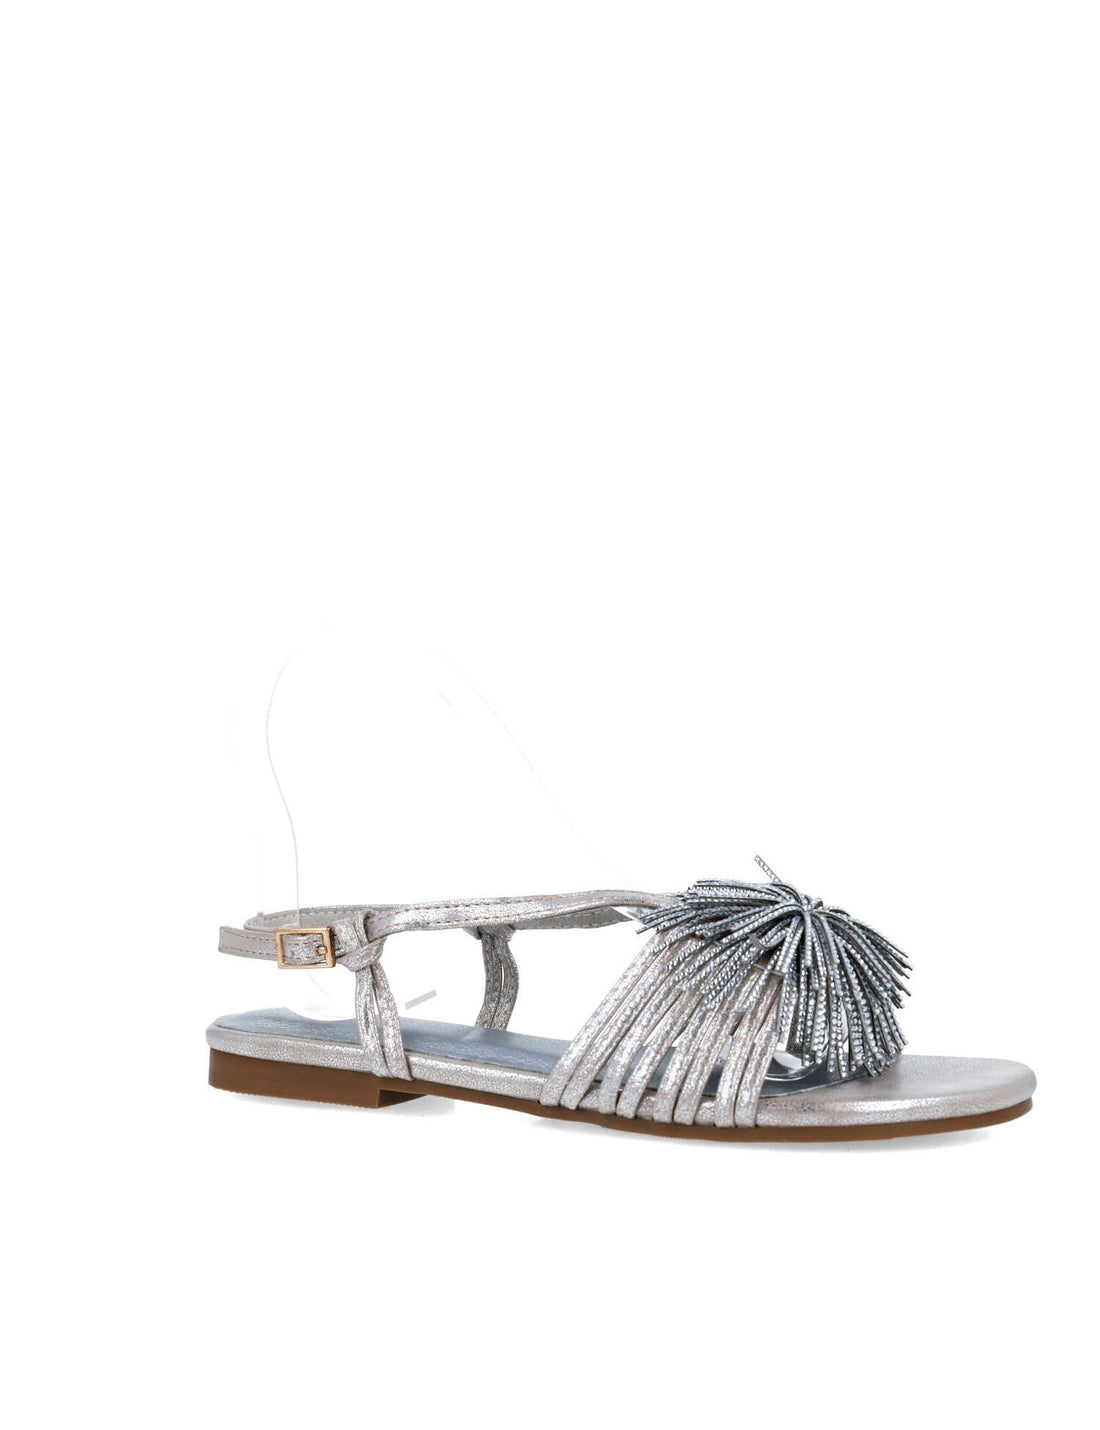 Silver Flat Sandals With Fringe Piece_25414_09_02